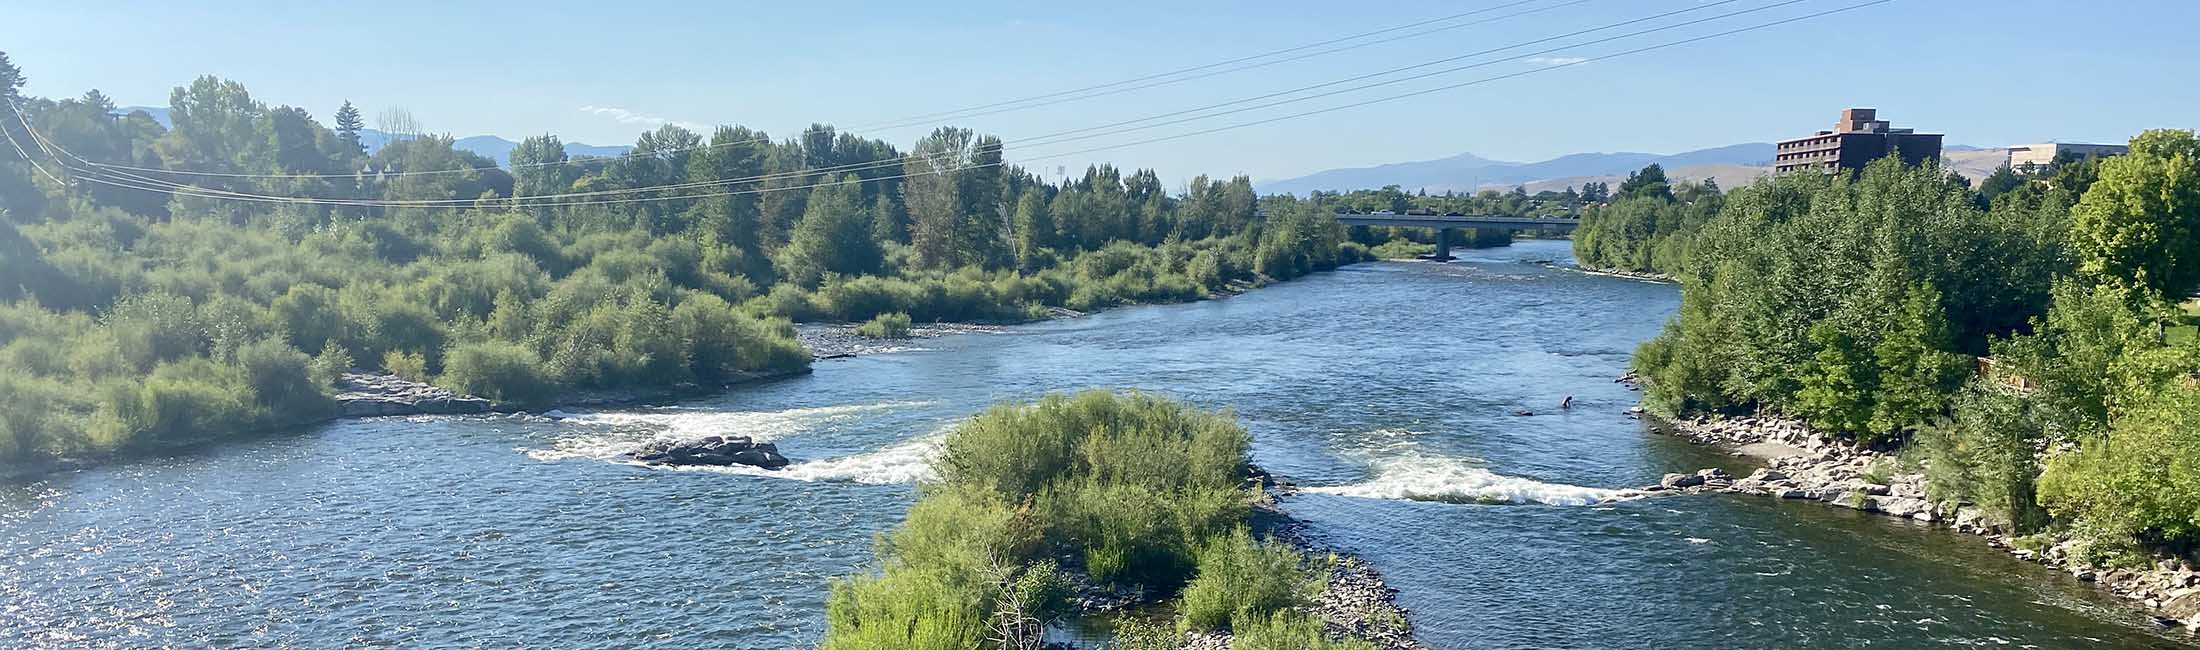 Your Monthly Guide to Missoula: September 2020